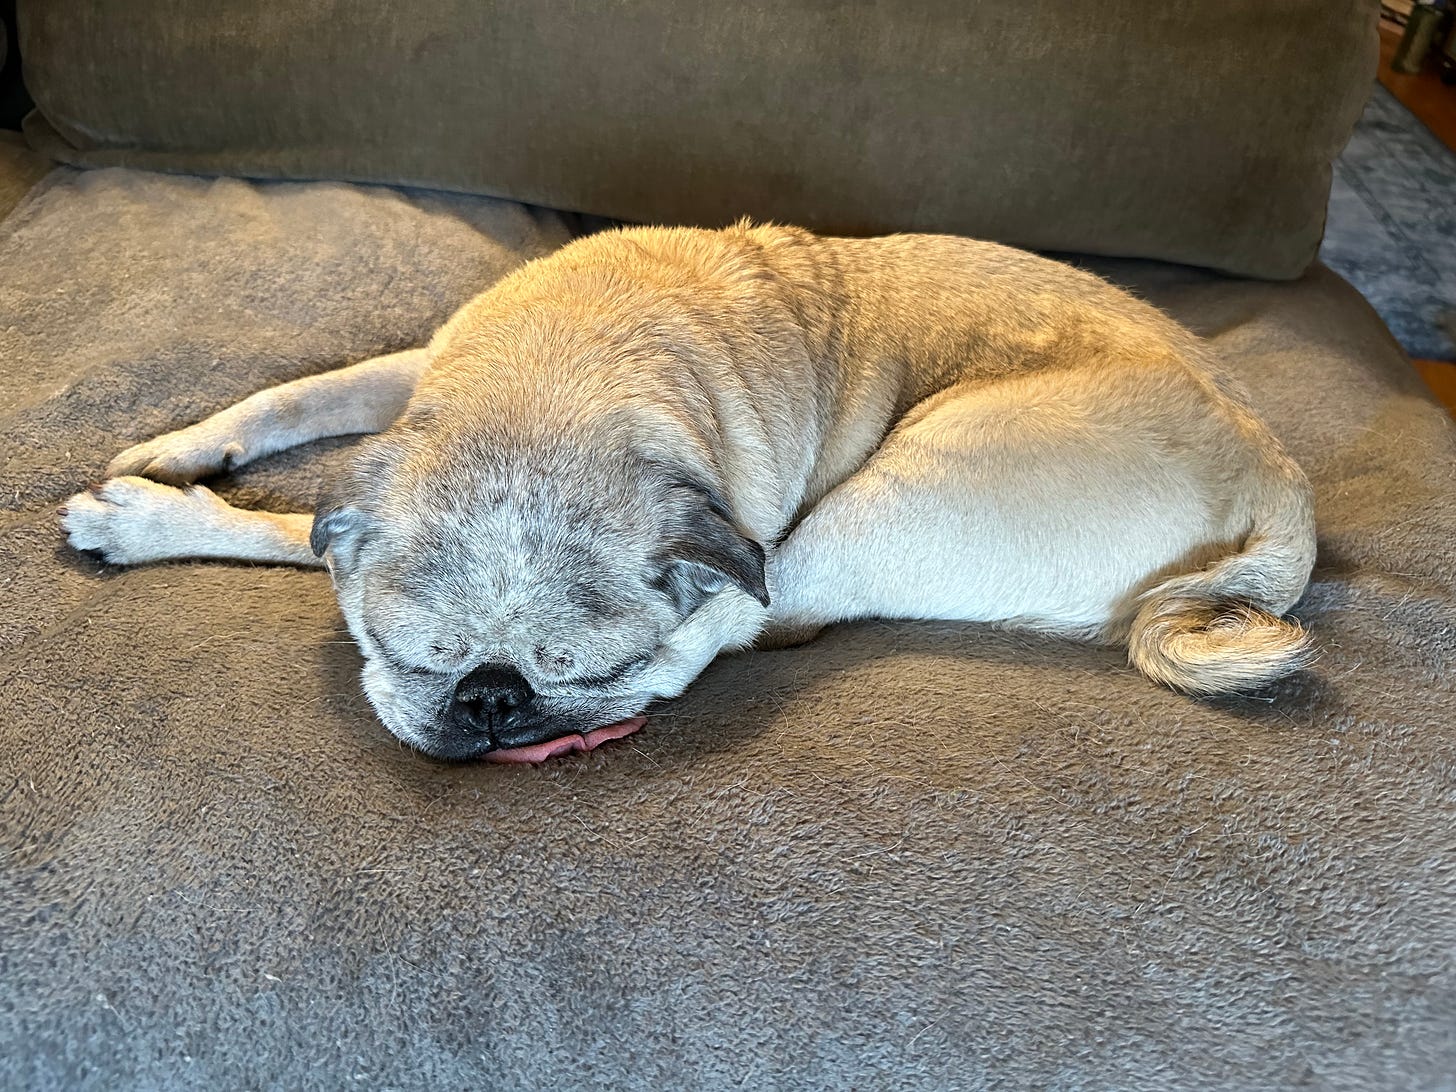 Bizzy, asleep on the couch.